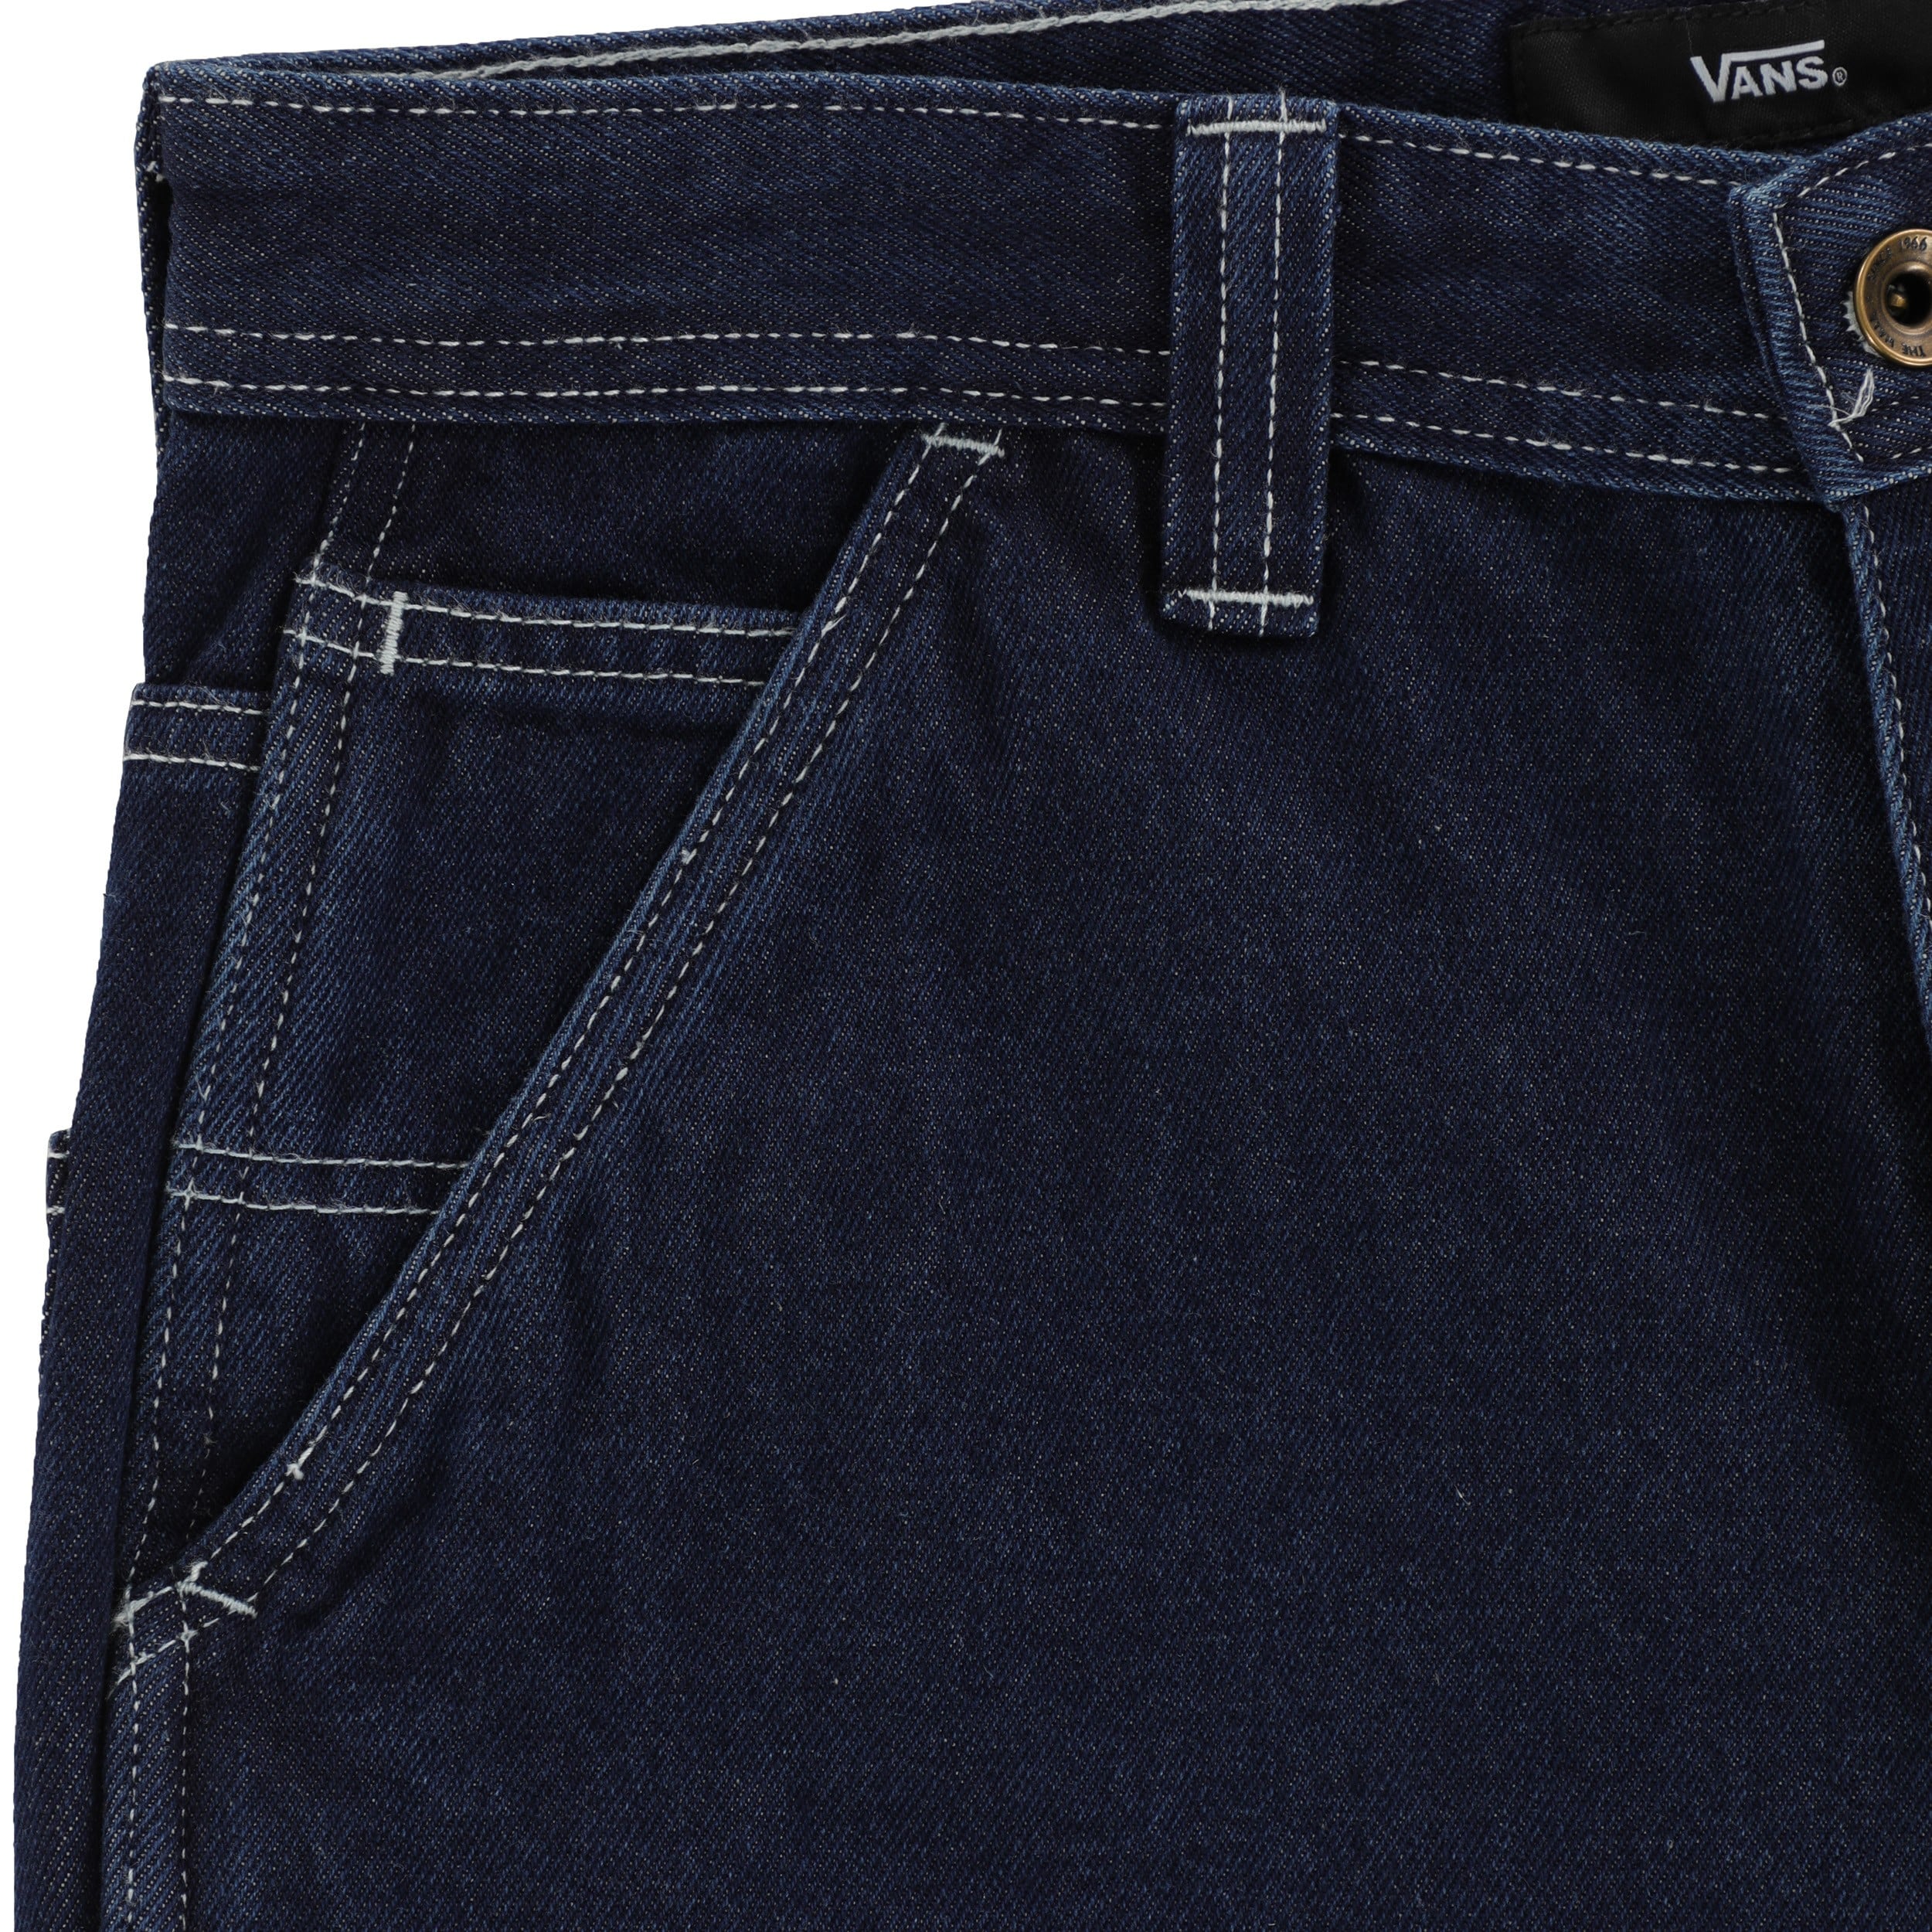 Vans Drill Chore Loose Tapered Jeans - midnight rinse | Tactics